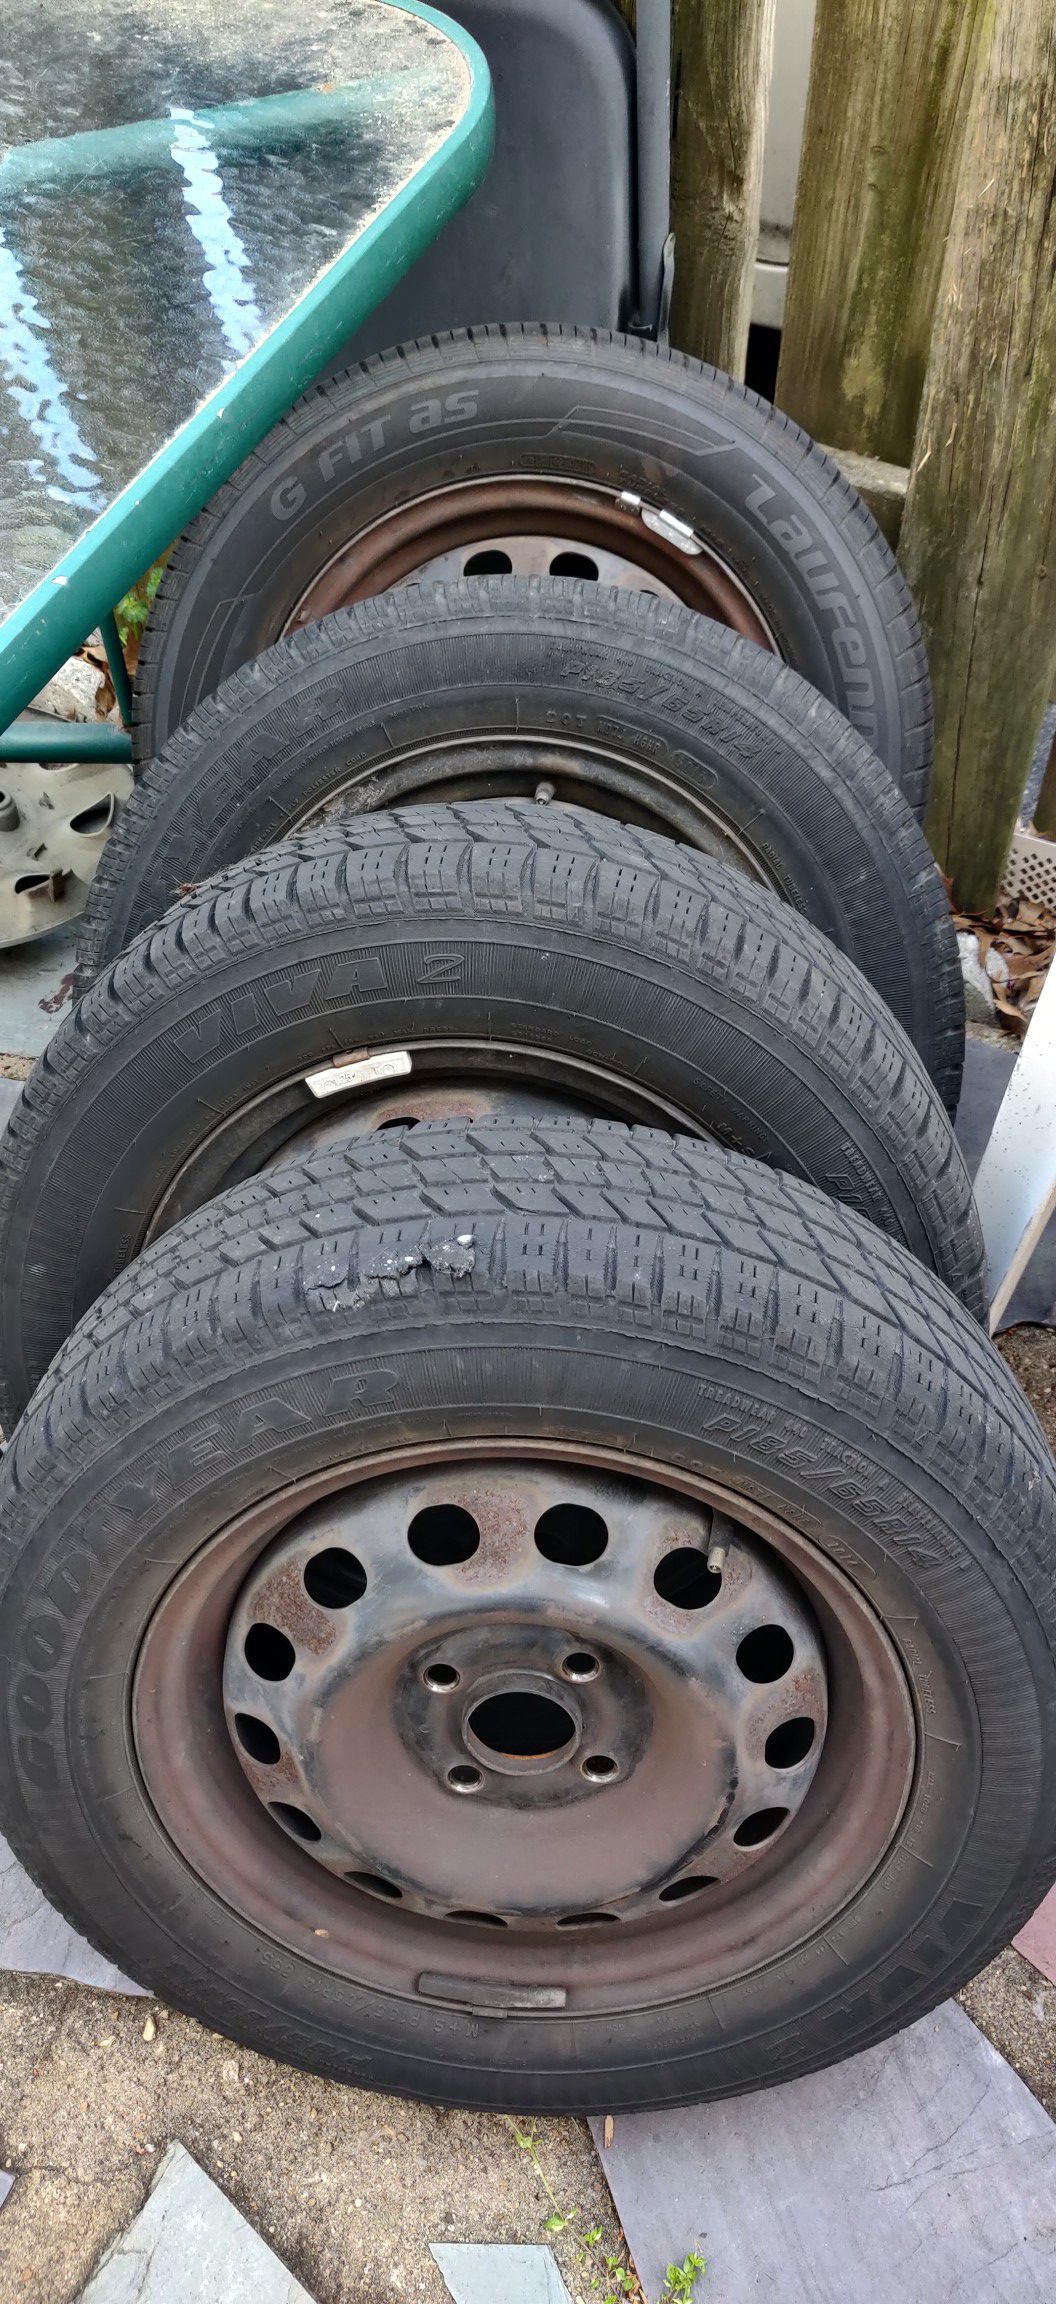 Rims and tires. USED CAME OFF MY HONDA CIVIC